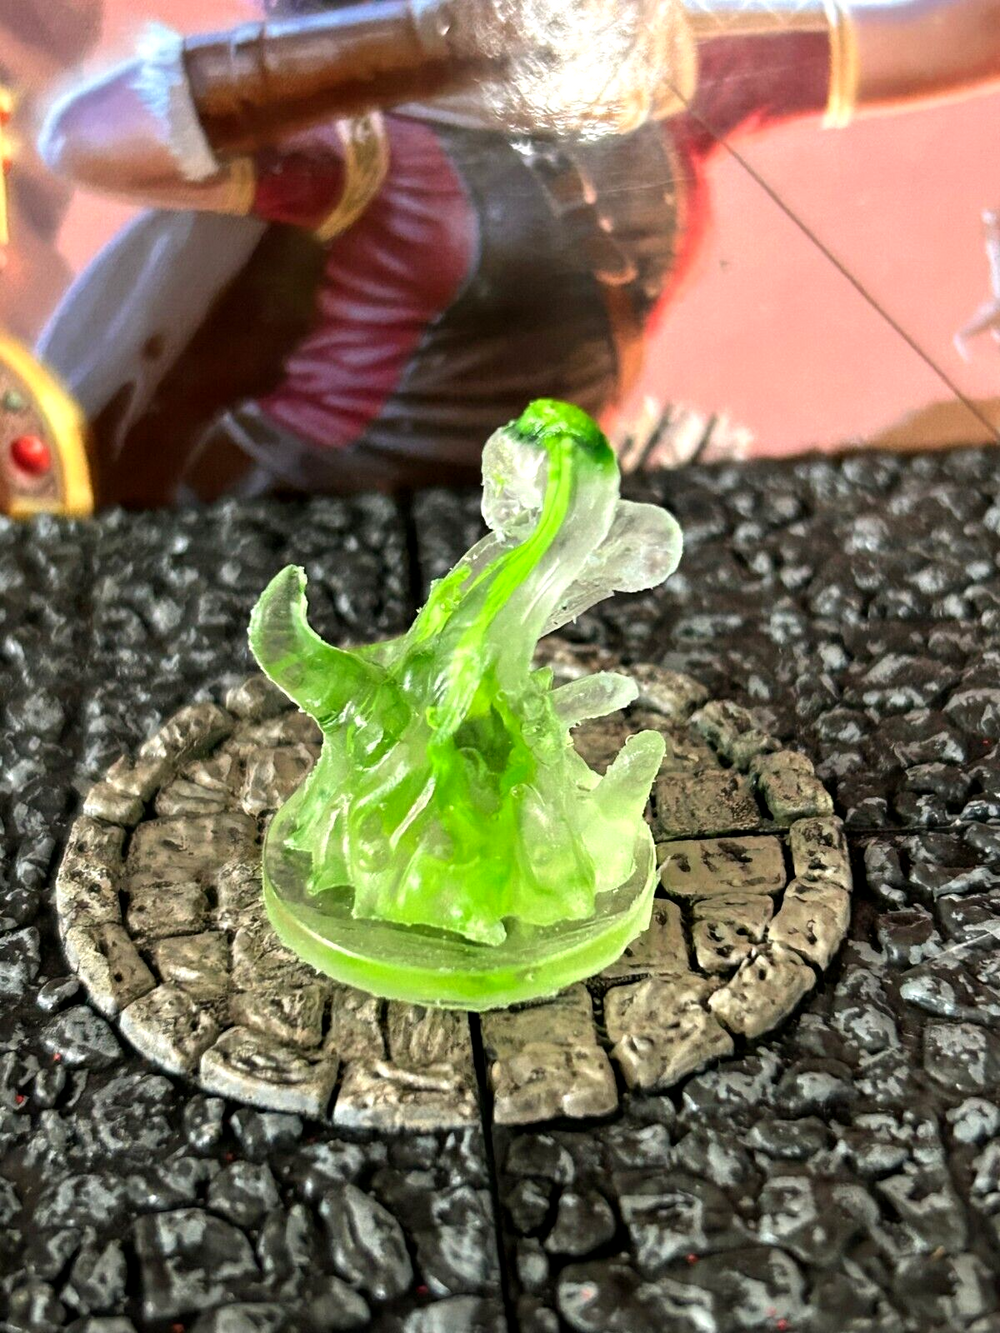 Green Slime ooze Dungeon & Dragons D&D terrain painted miniature medium jelly